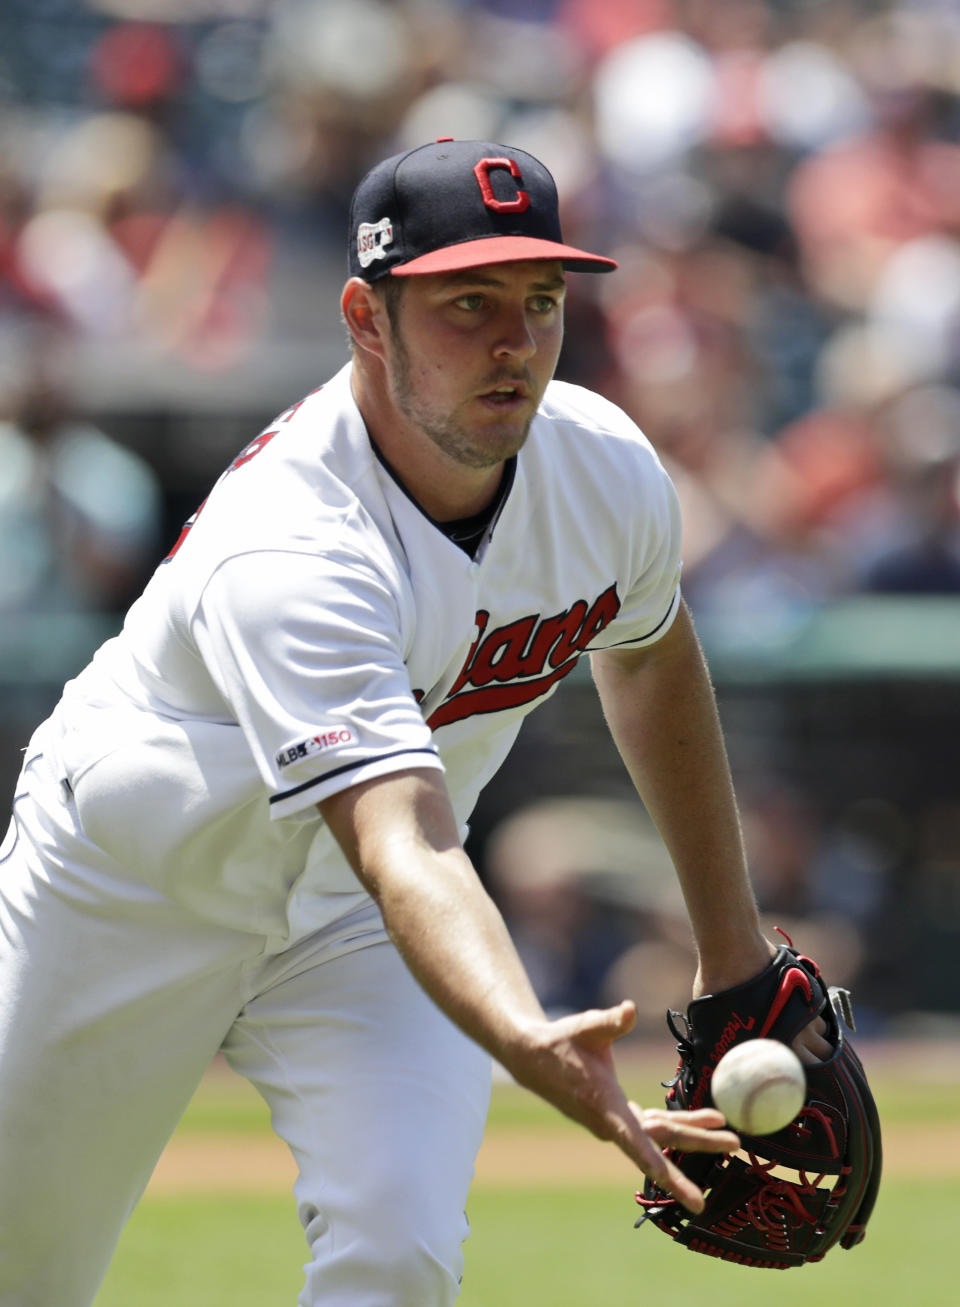 Cleveland Indians starting pitcher Trevor Bauer tosses the ball to first base to get Kansas City Royals' Whit Merrifield out in the fifth inning in a baseball game, Wednesday, June 26, 2019, in Cleveland. (AP Photo/Tony Dejak)